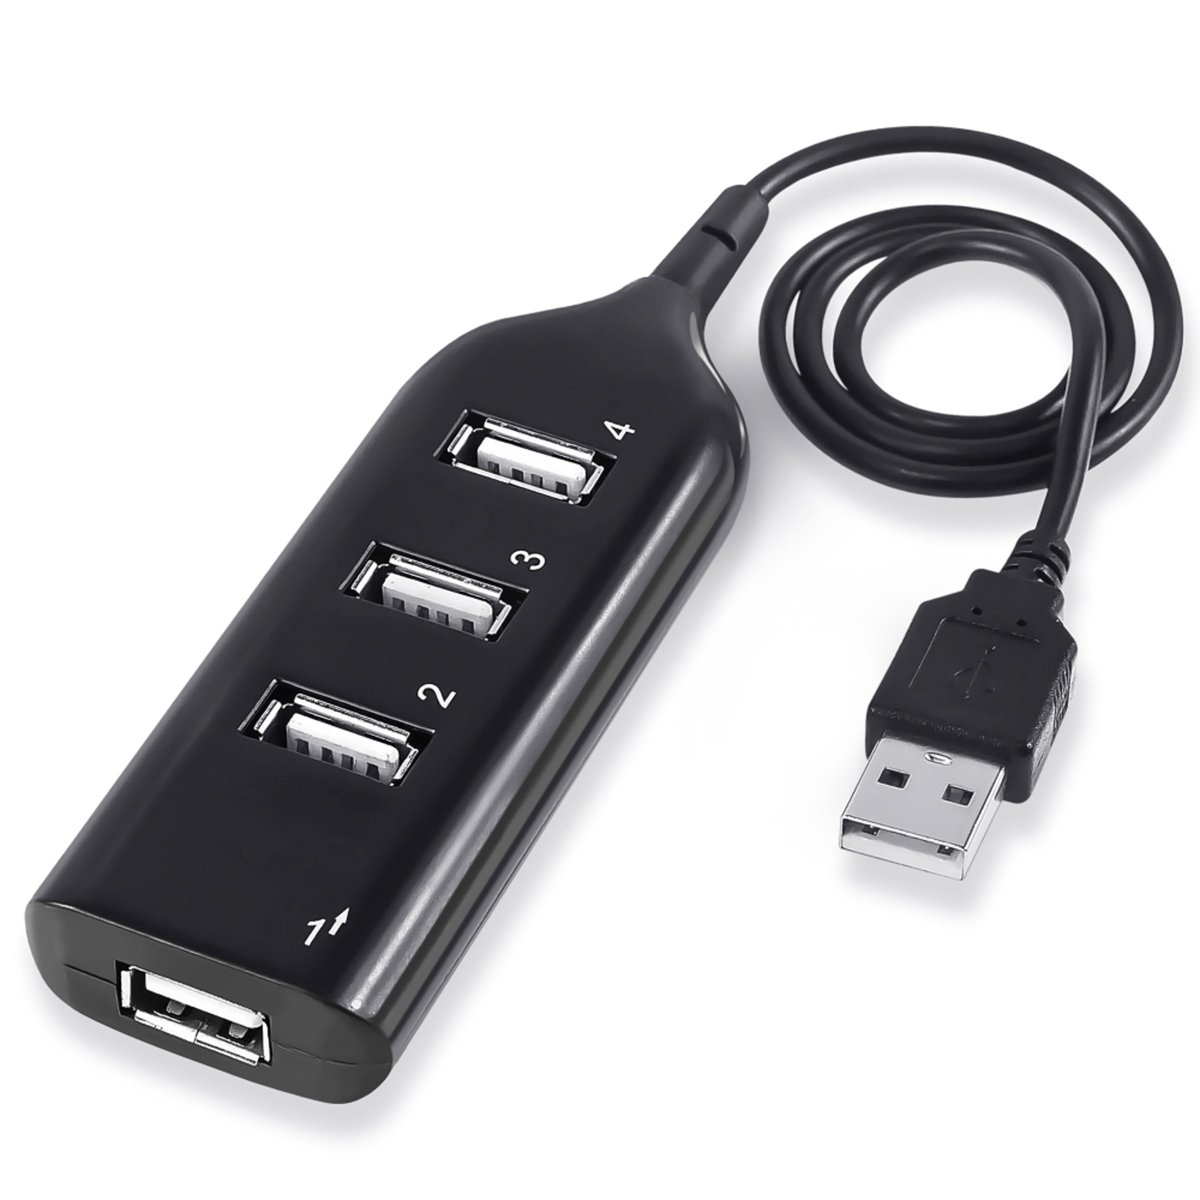 Different USB ports or computer